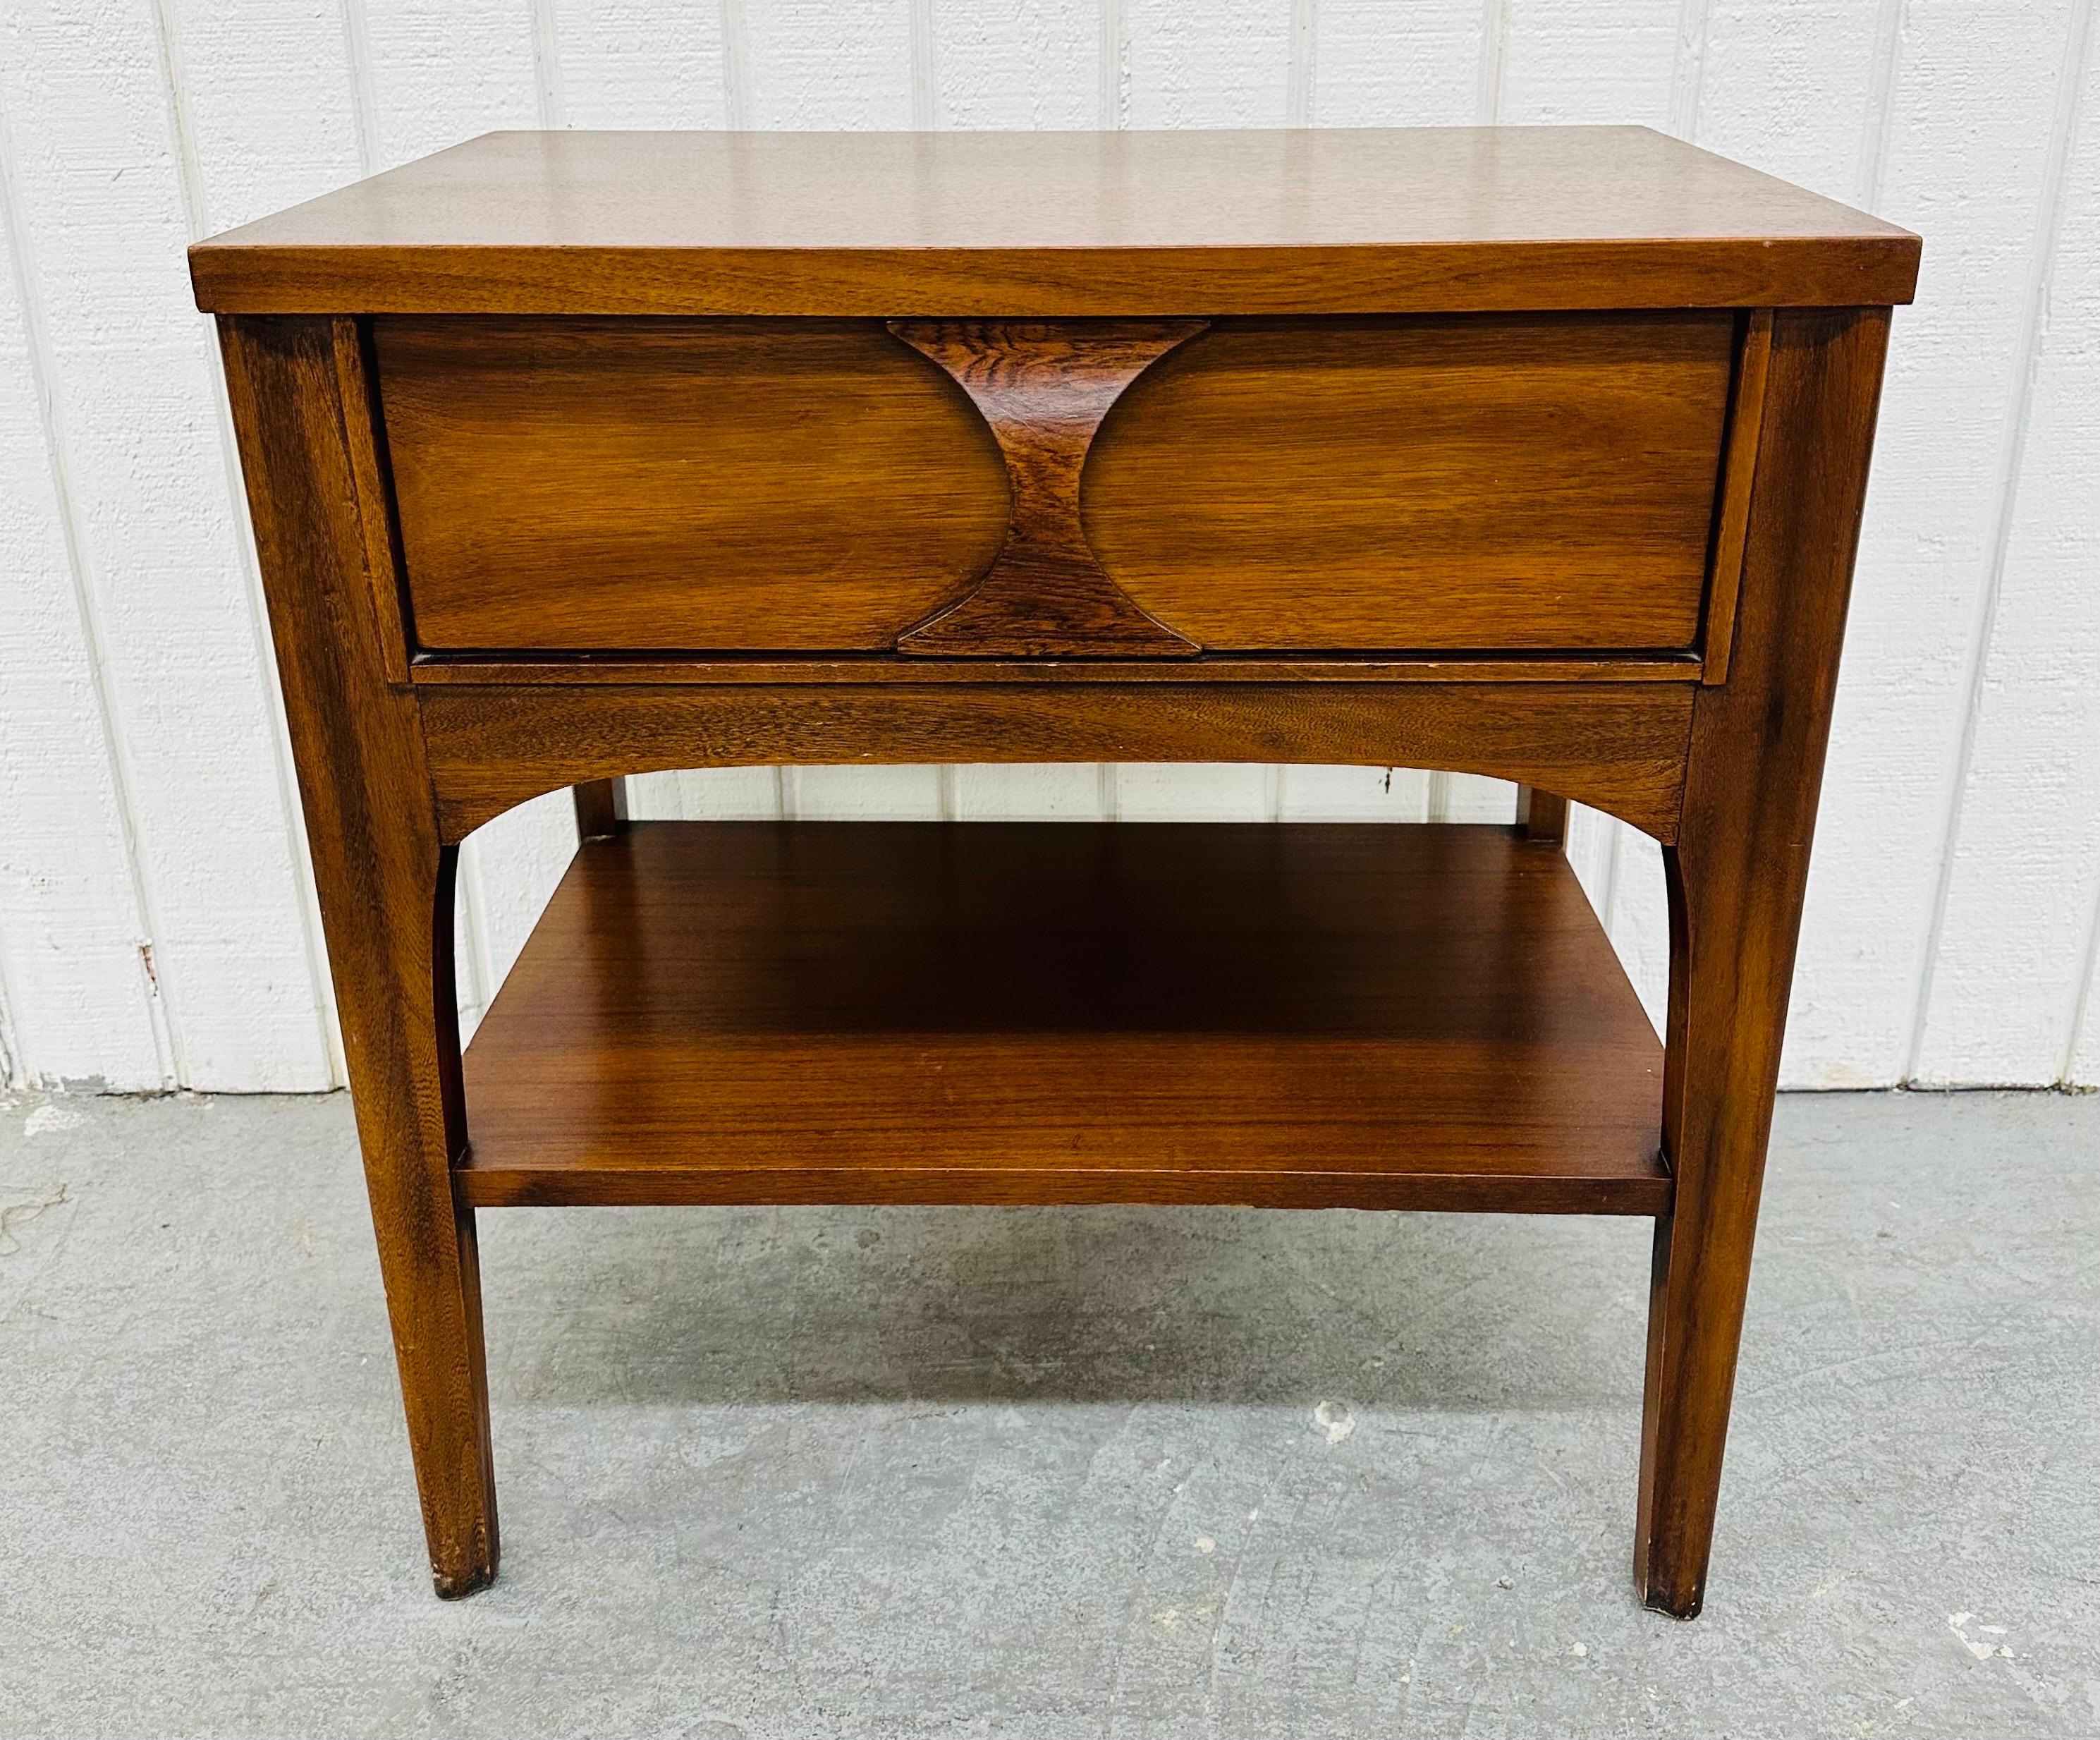 This listing is for a Mid-Century Modern Kent Coffey Perspecta Walnut Nightstand. Featuring a straight line design, rectangular top, single drawer for storage, sculpted rosewood pull, bottom shelf for more storage space, and a beautiful walnut